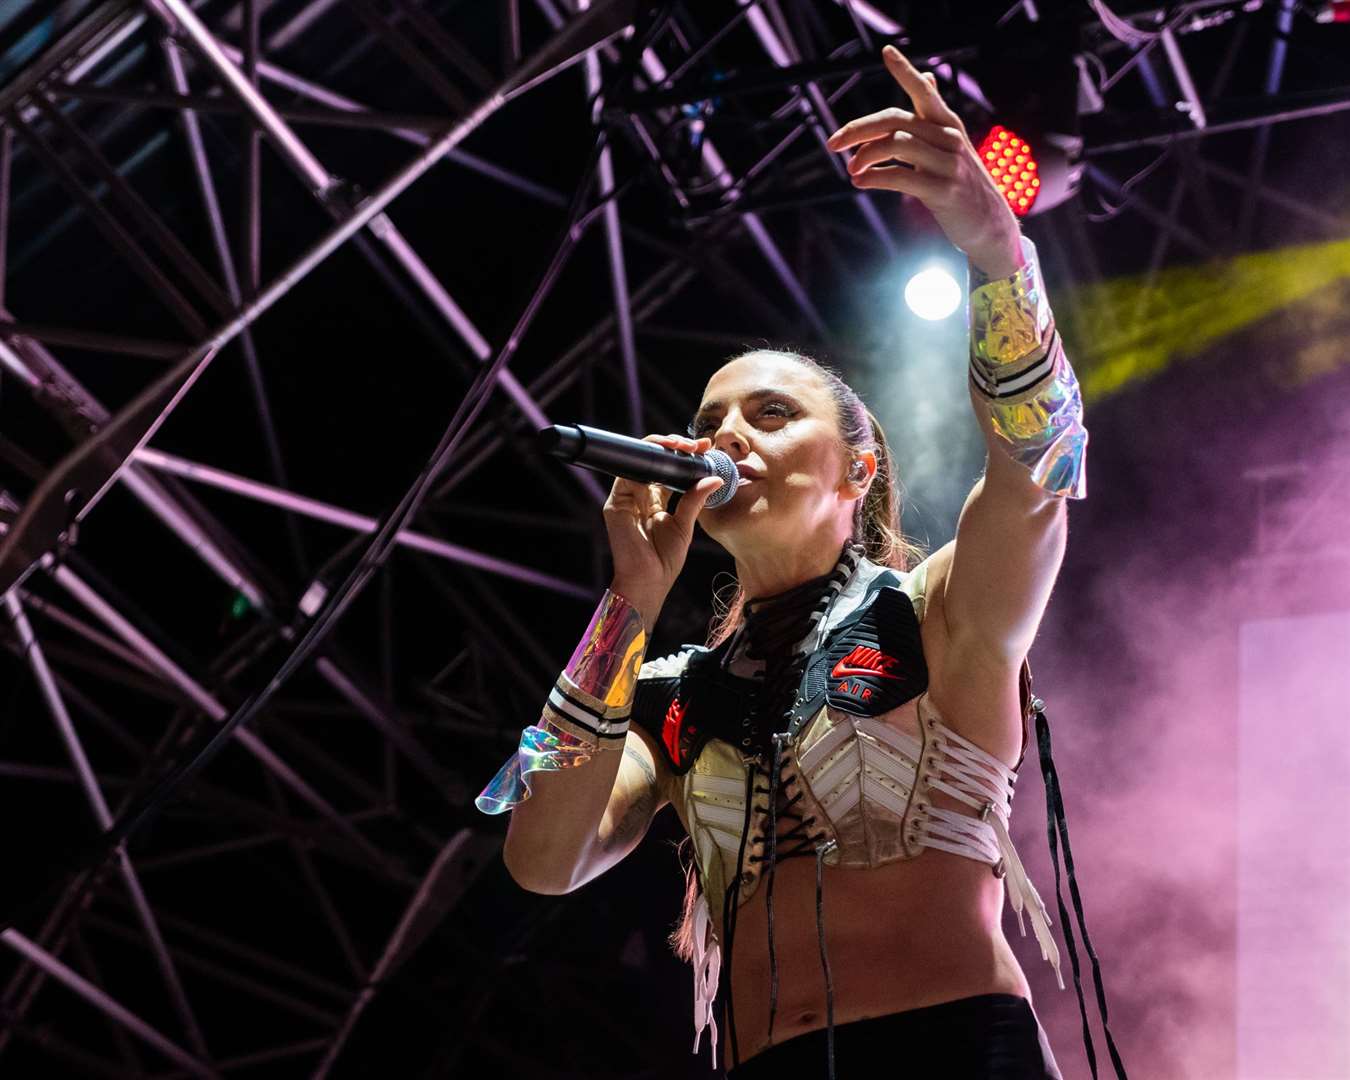 A sell out crowd partied the night away at the Melanie C concert at Dreamland as part of Margate Pride in 2019. Picture: Dreamland Margate